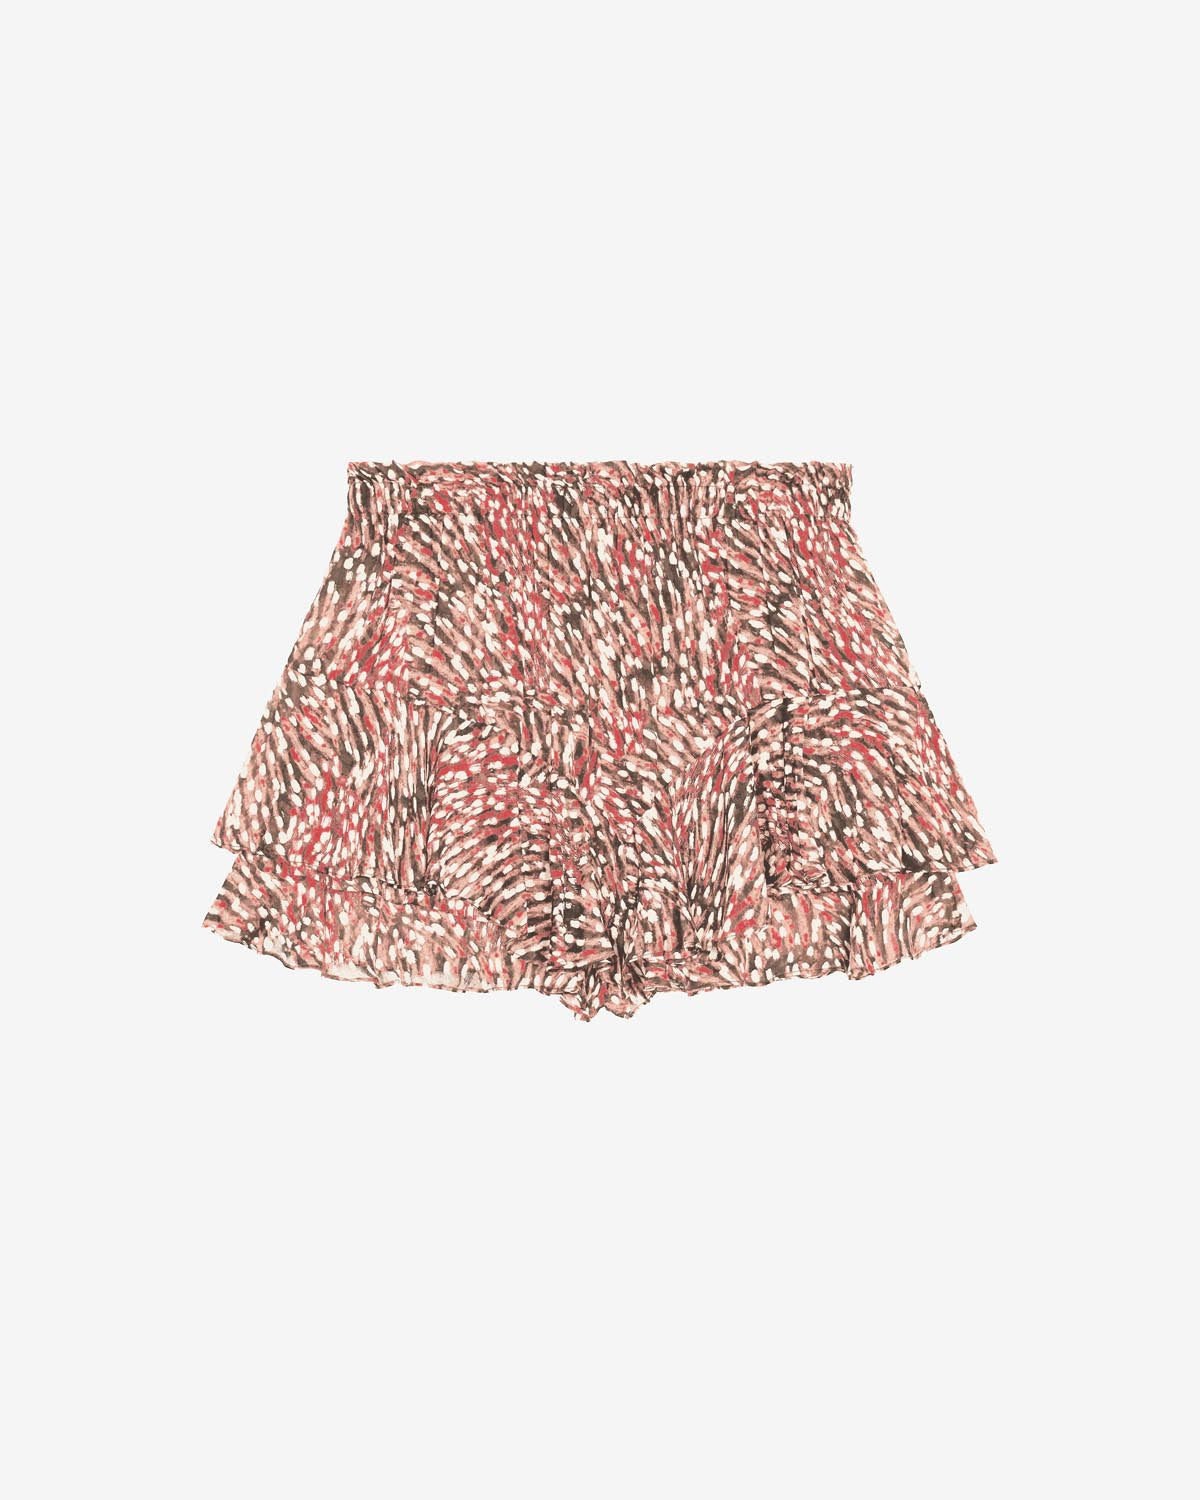 Pants and Shorts Etoile Woman | ISABEL MARANT Official